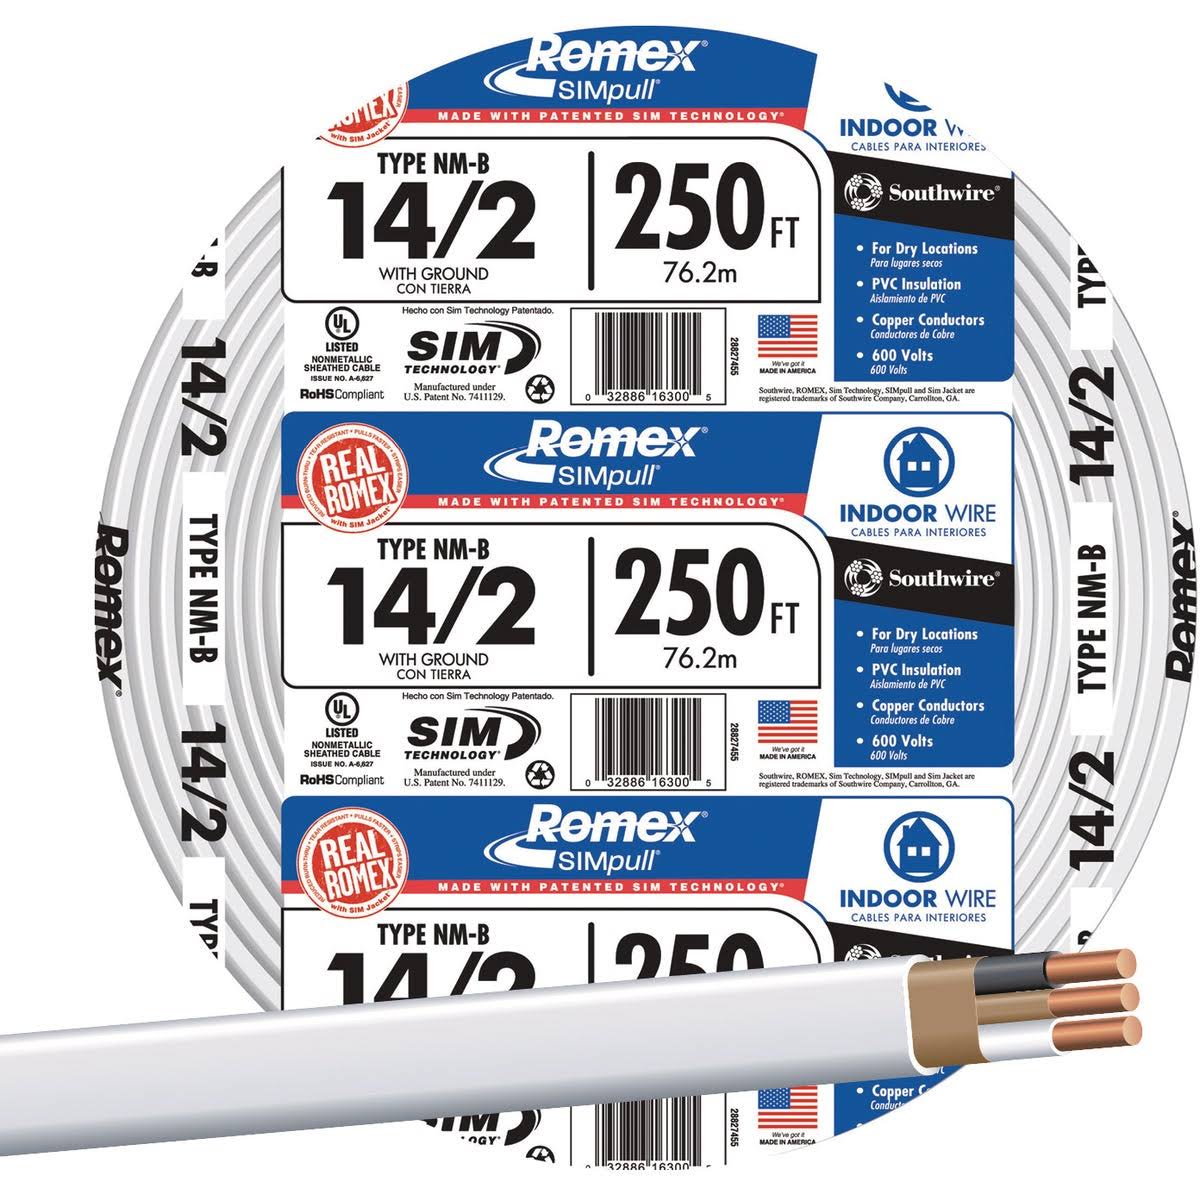 Romex 250 ft. 14-2 Solid White NMW/G Wire 28827455